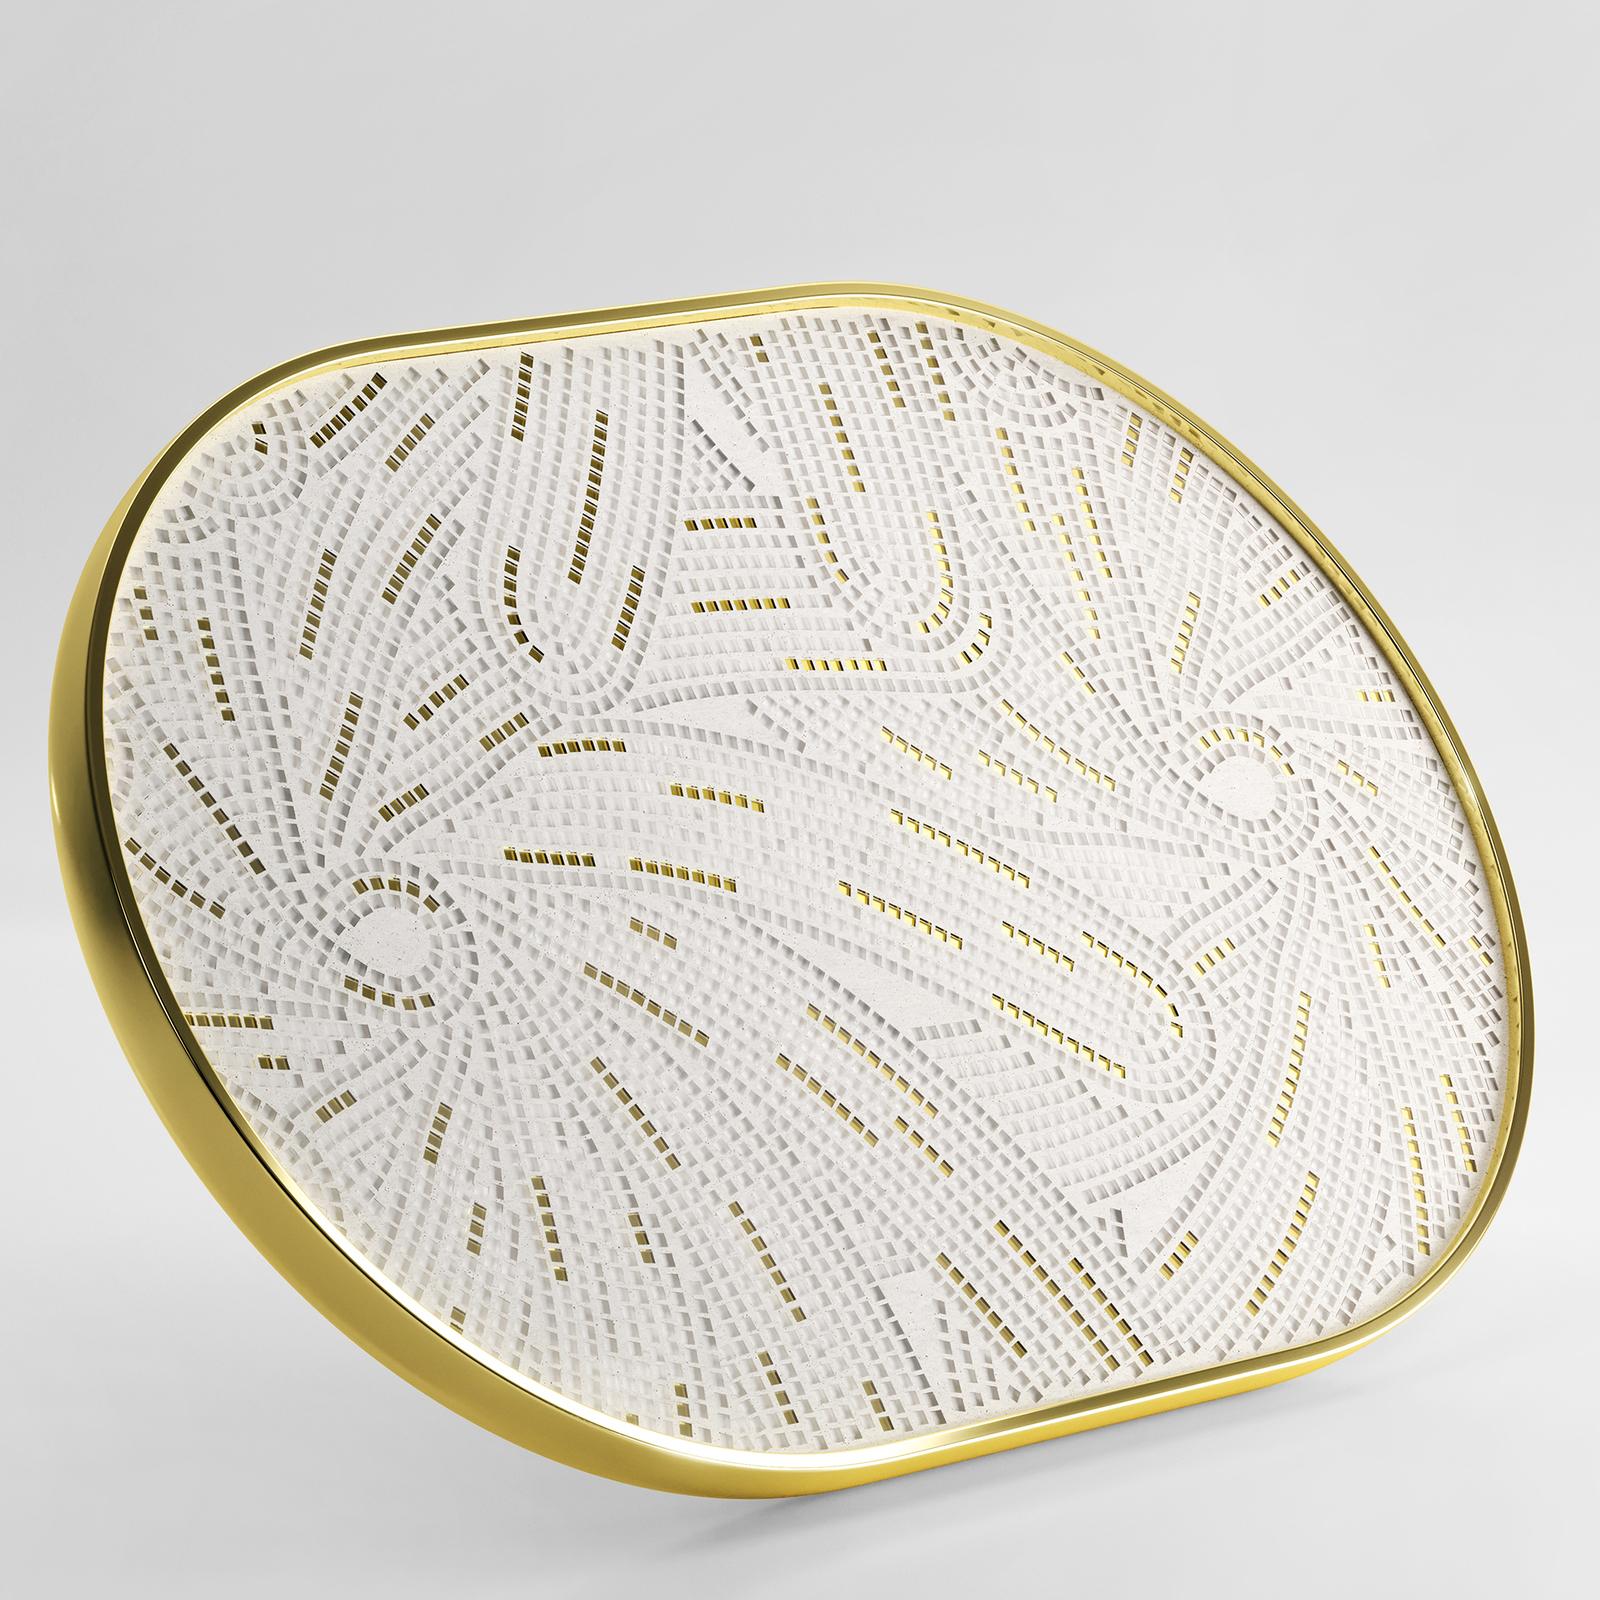 Distinguished for its sculptural allure and Minimalist design, this exquisite tray is a limited-edition piece designed by artist Matteo Cibic for the SpecialFriends collection. This 24-karat gold-plated ceramic oval tray uses TILLA picotesserae to